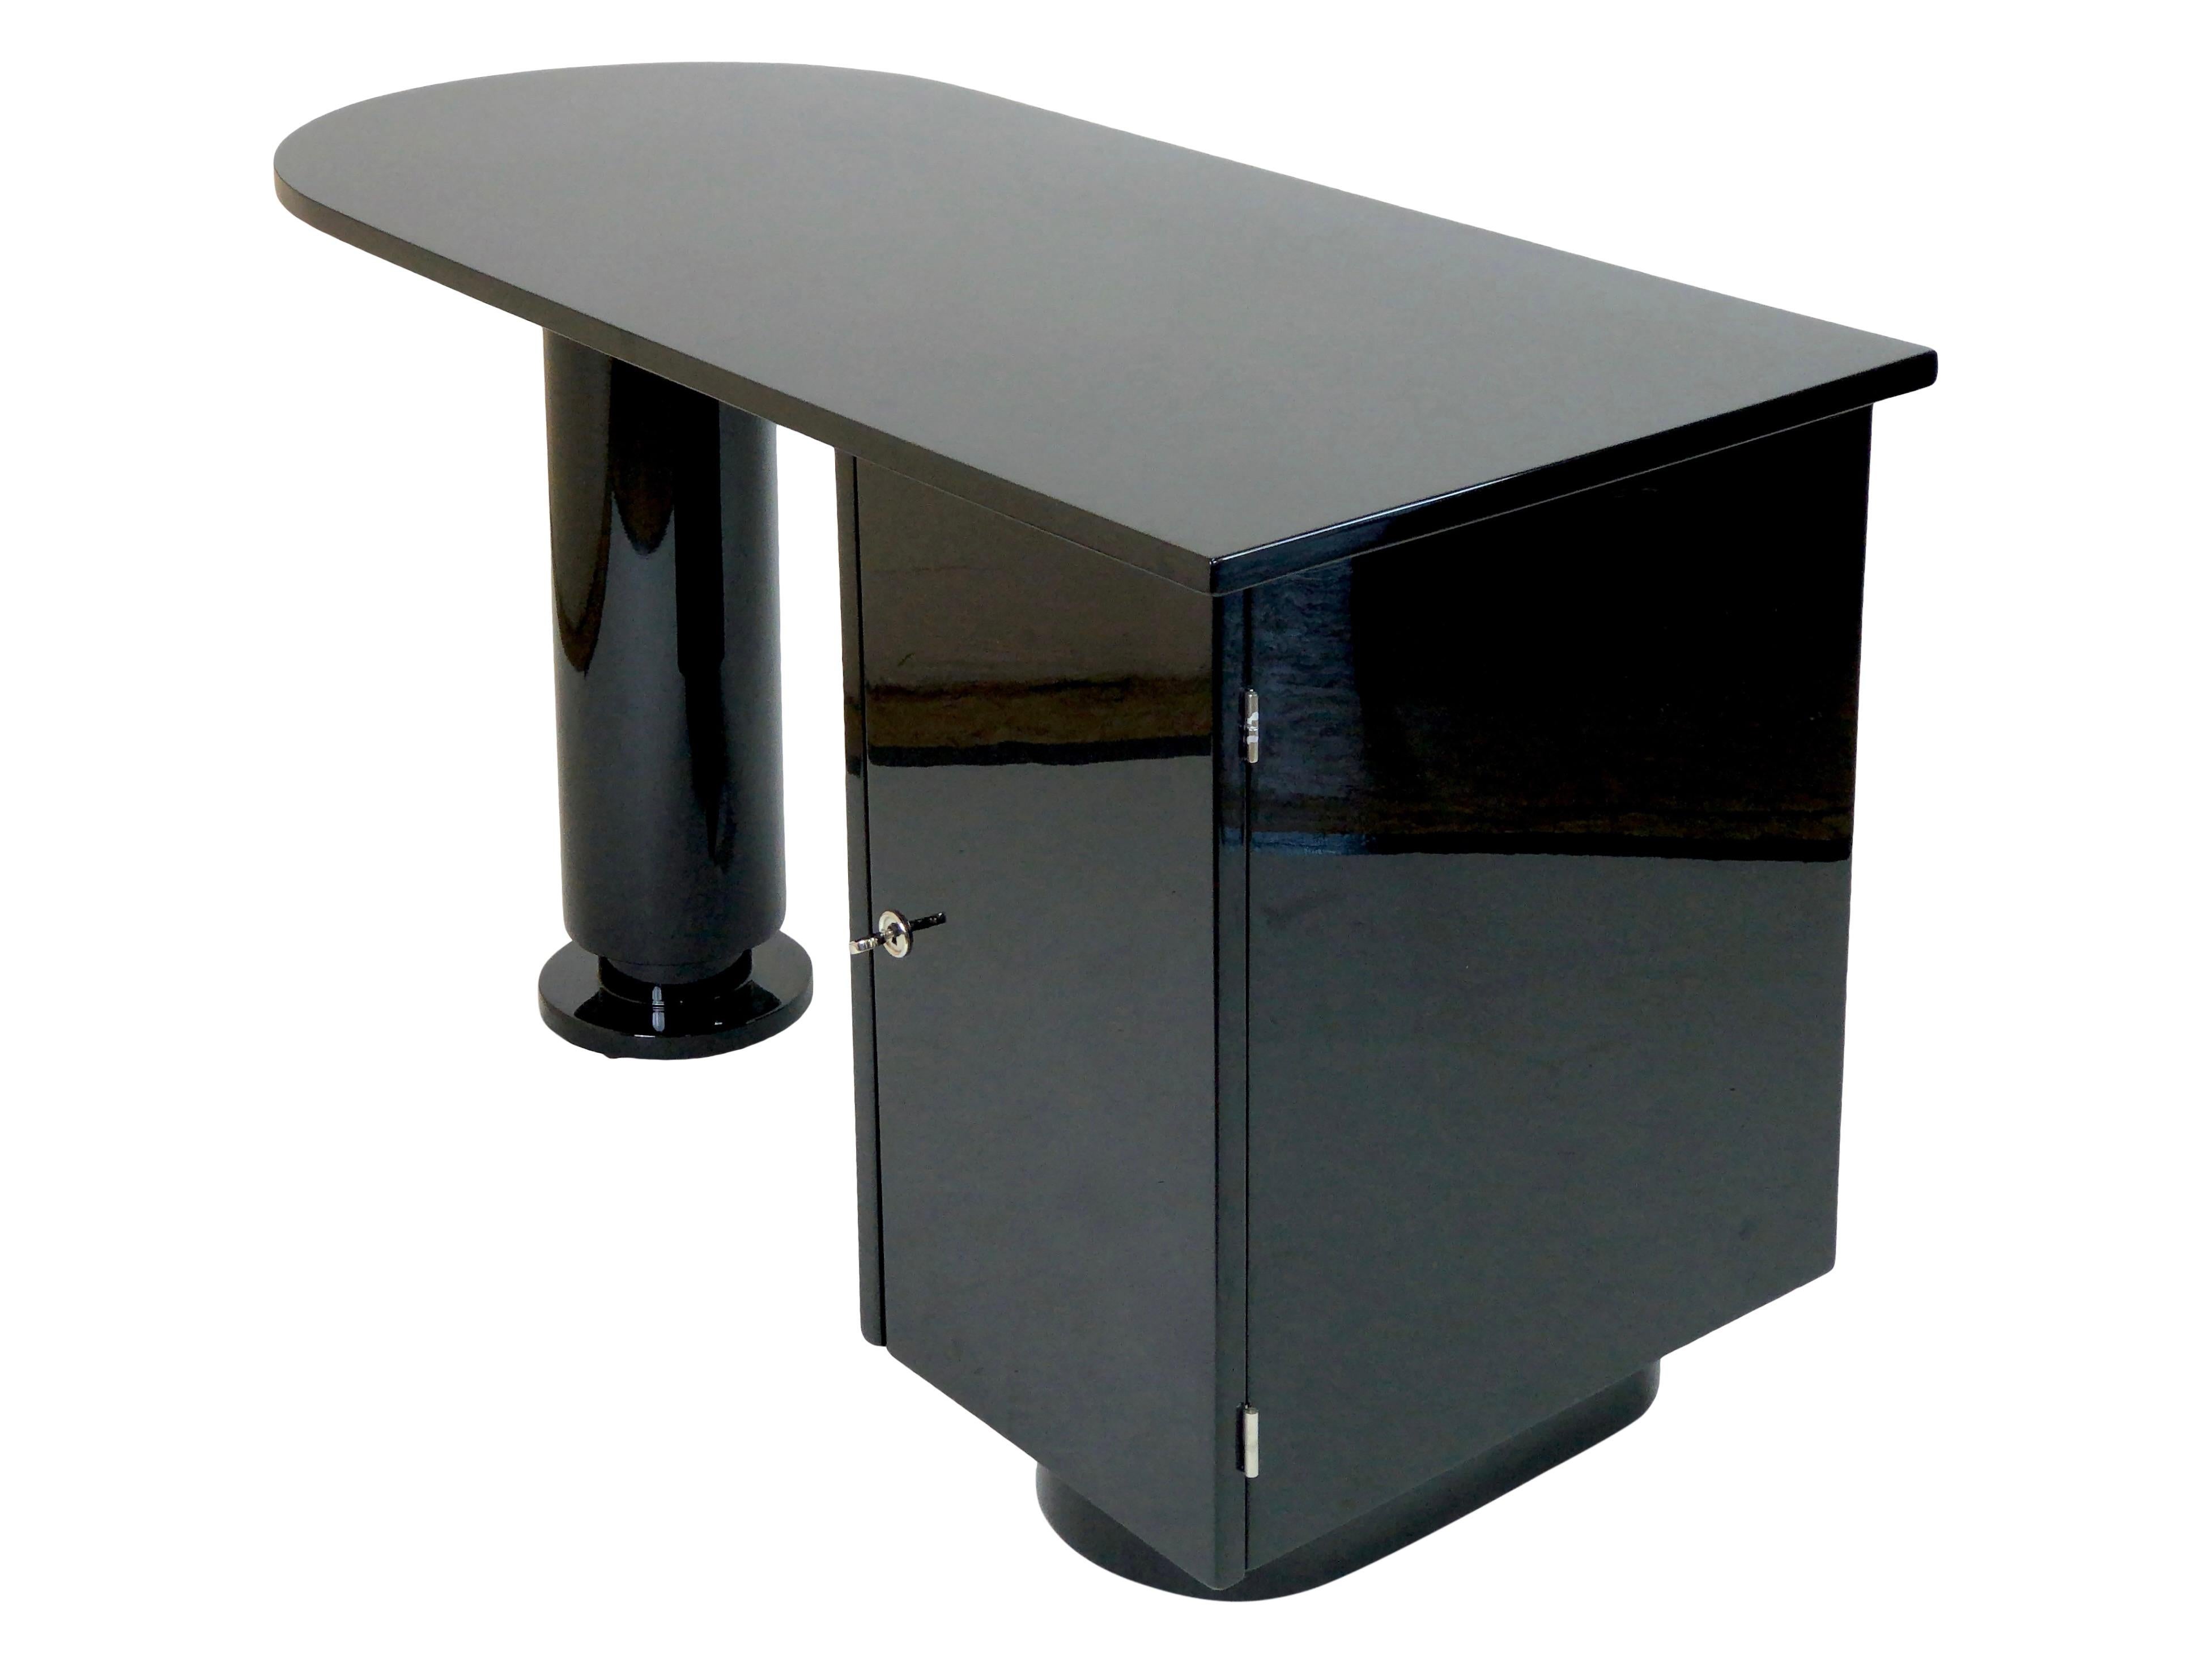 Wood Asymmetric Rounded 1930s French Art Deco Office Desk Black Lacquer with Column